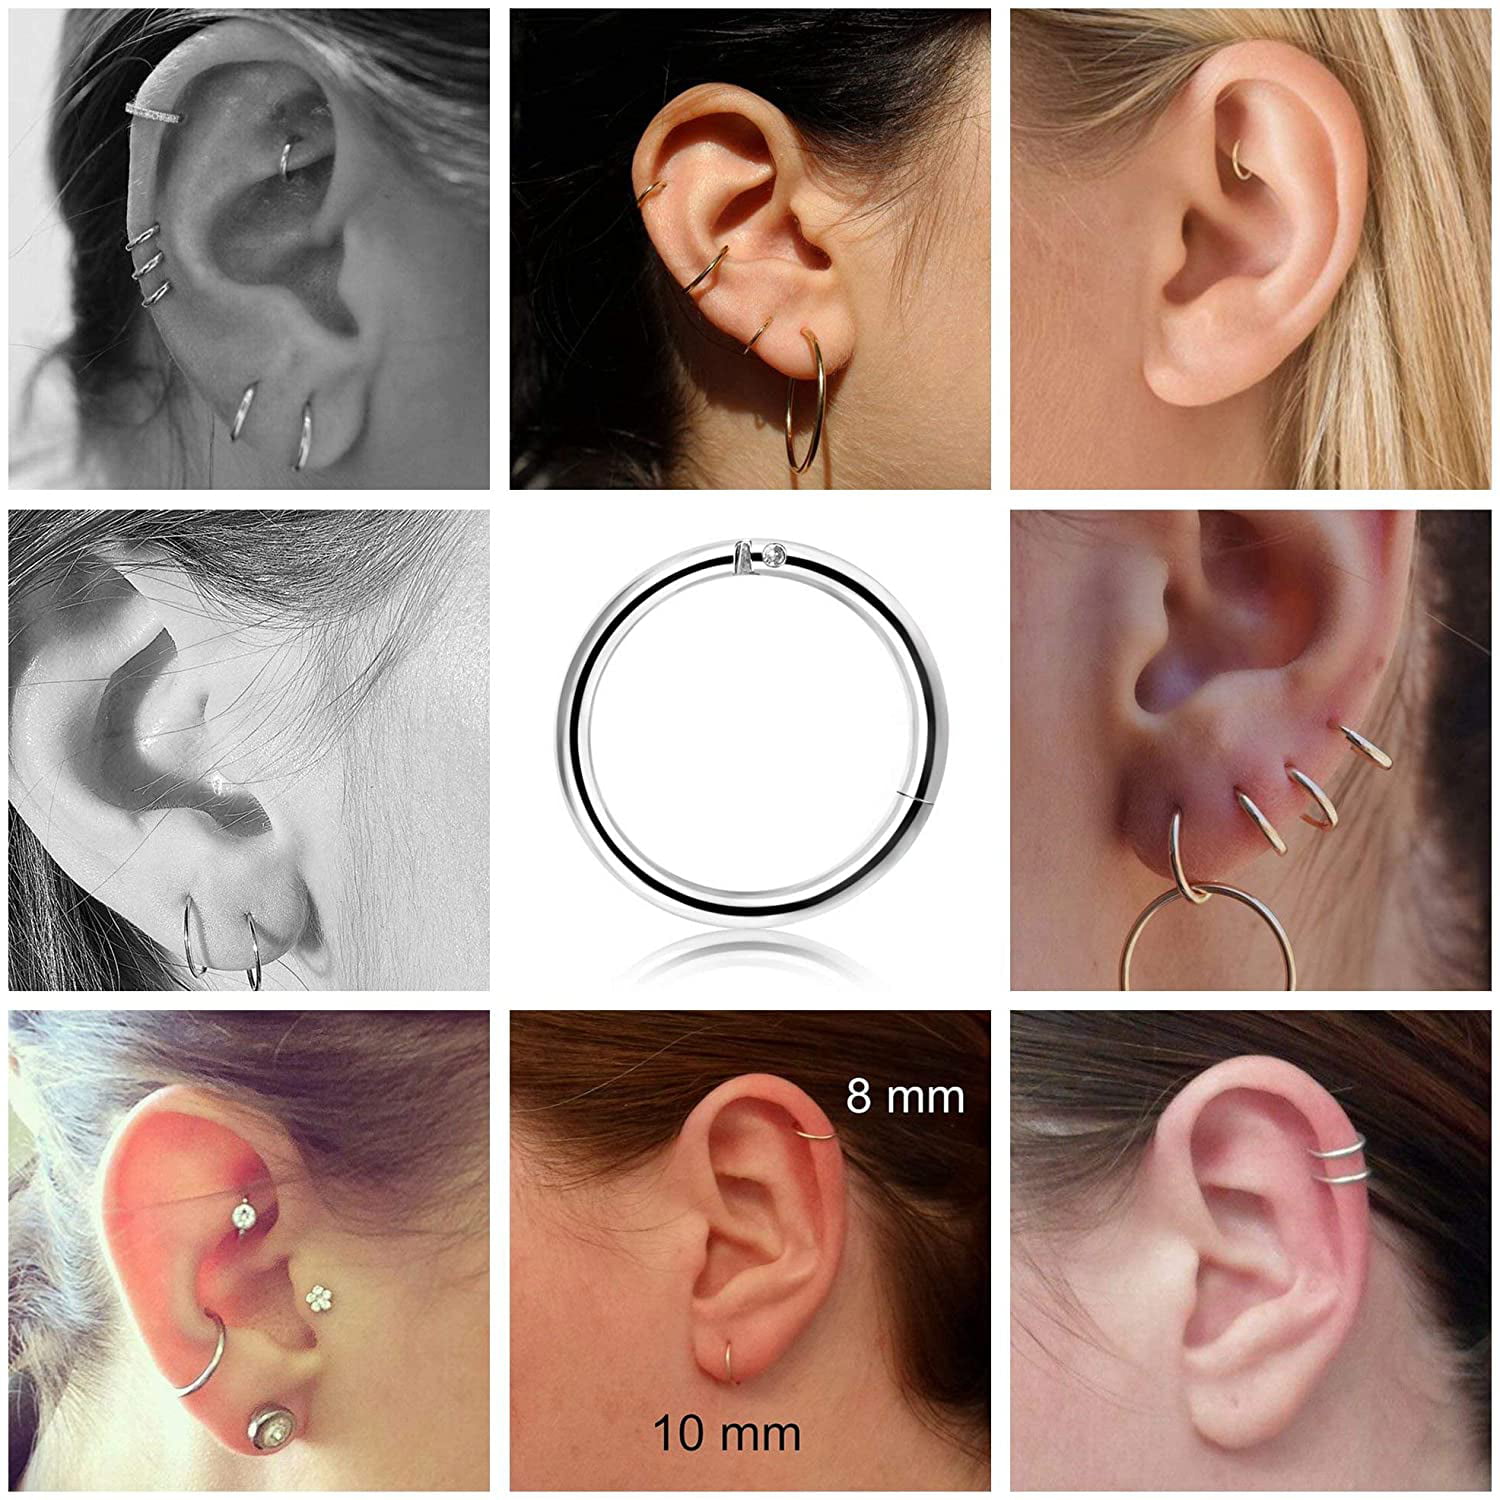 FIBO STEEL 10Pcs 6-14mm Stainless Steel 16g Cartilage Hoop Earrings for Men Women Nose Ring Helix Septum Couch Daith Lip Tragus Piercing Jewelry Set 